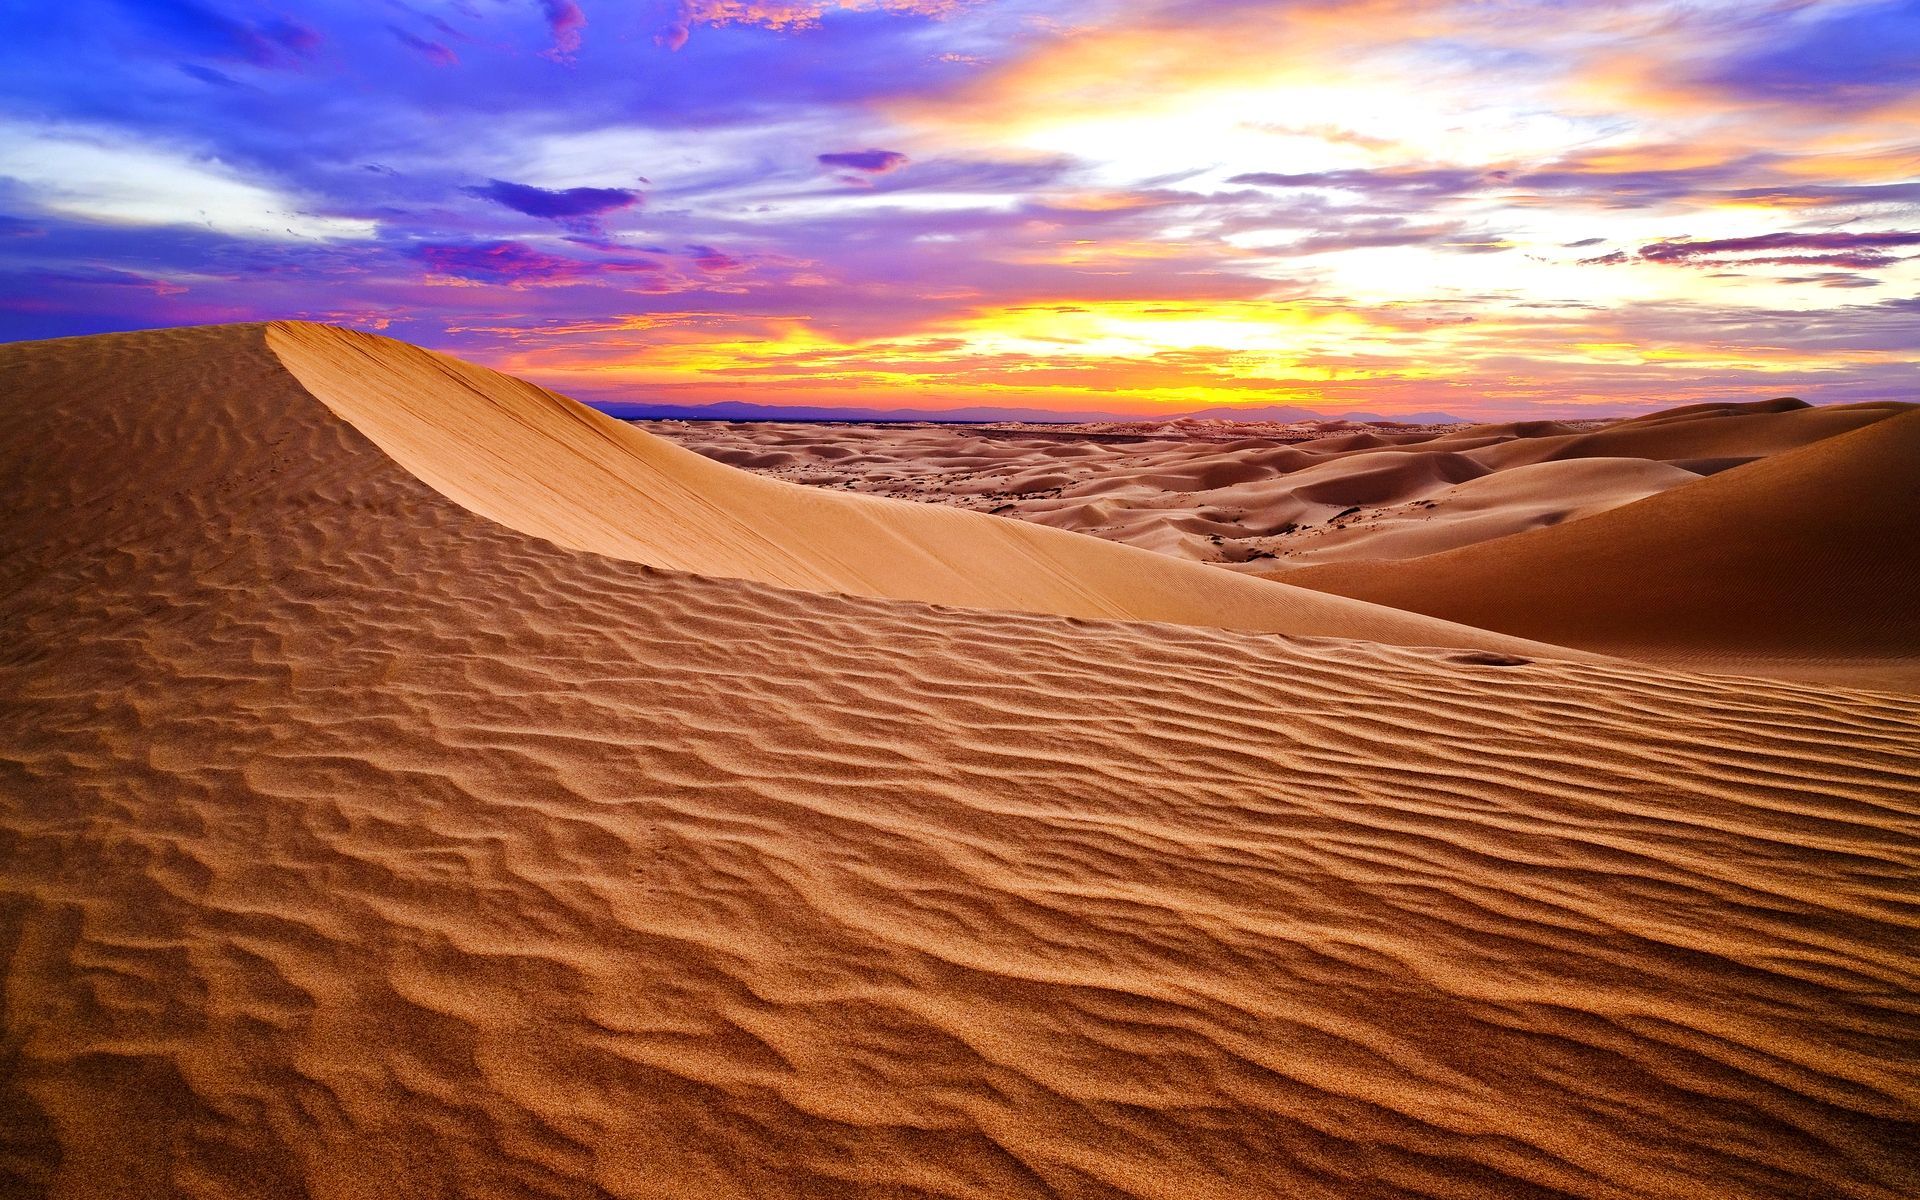 Desert pictures, Hd nature wallpapers, Nature wallpapers